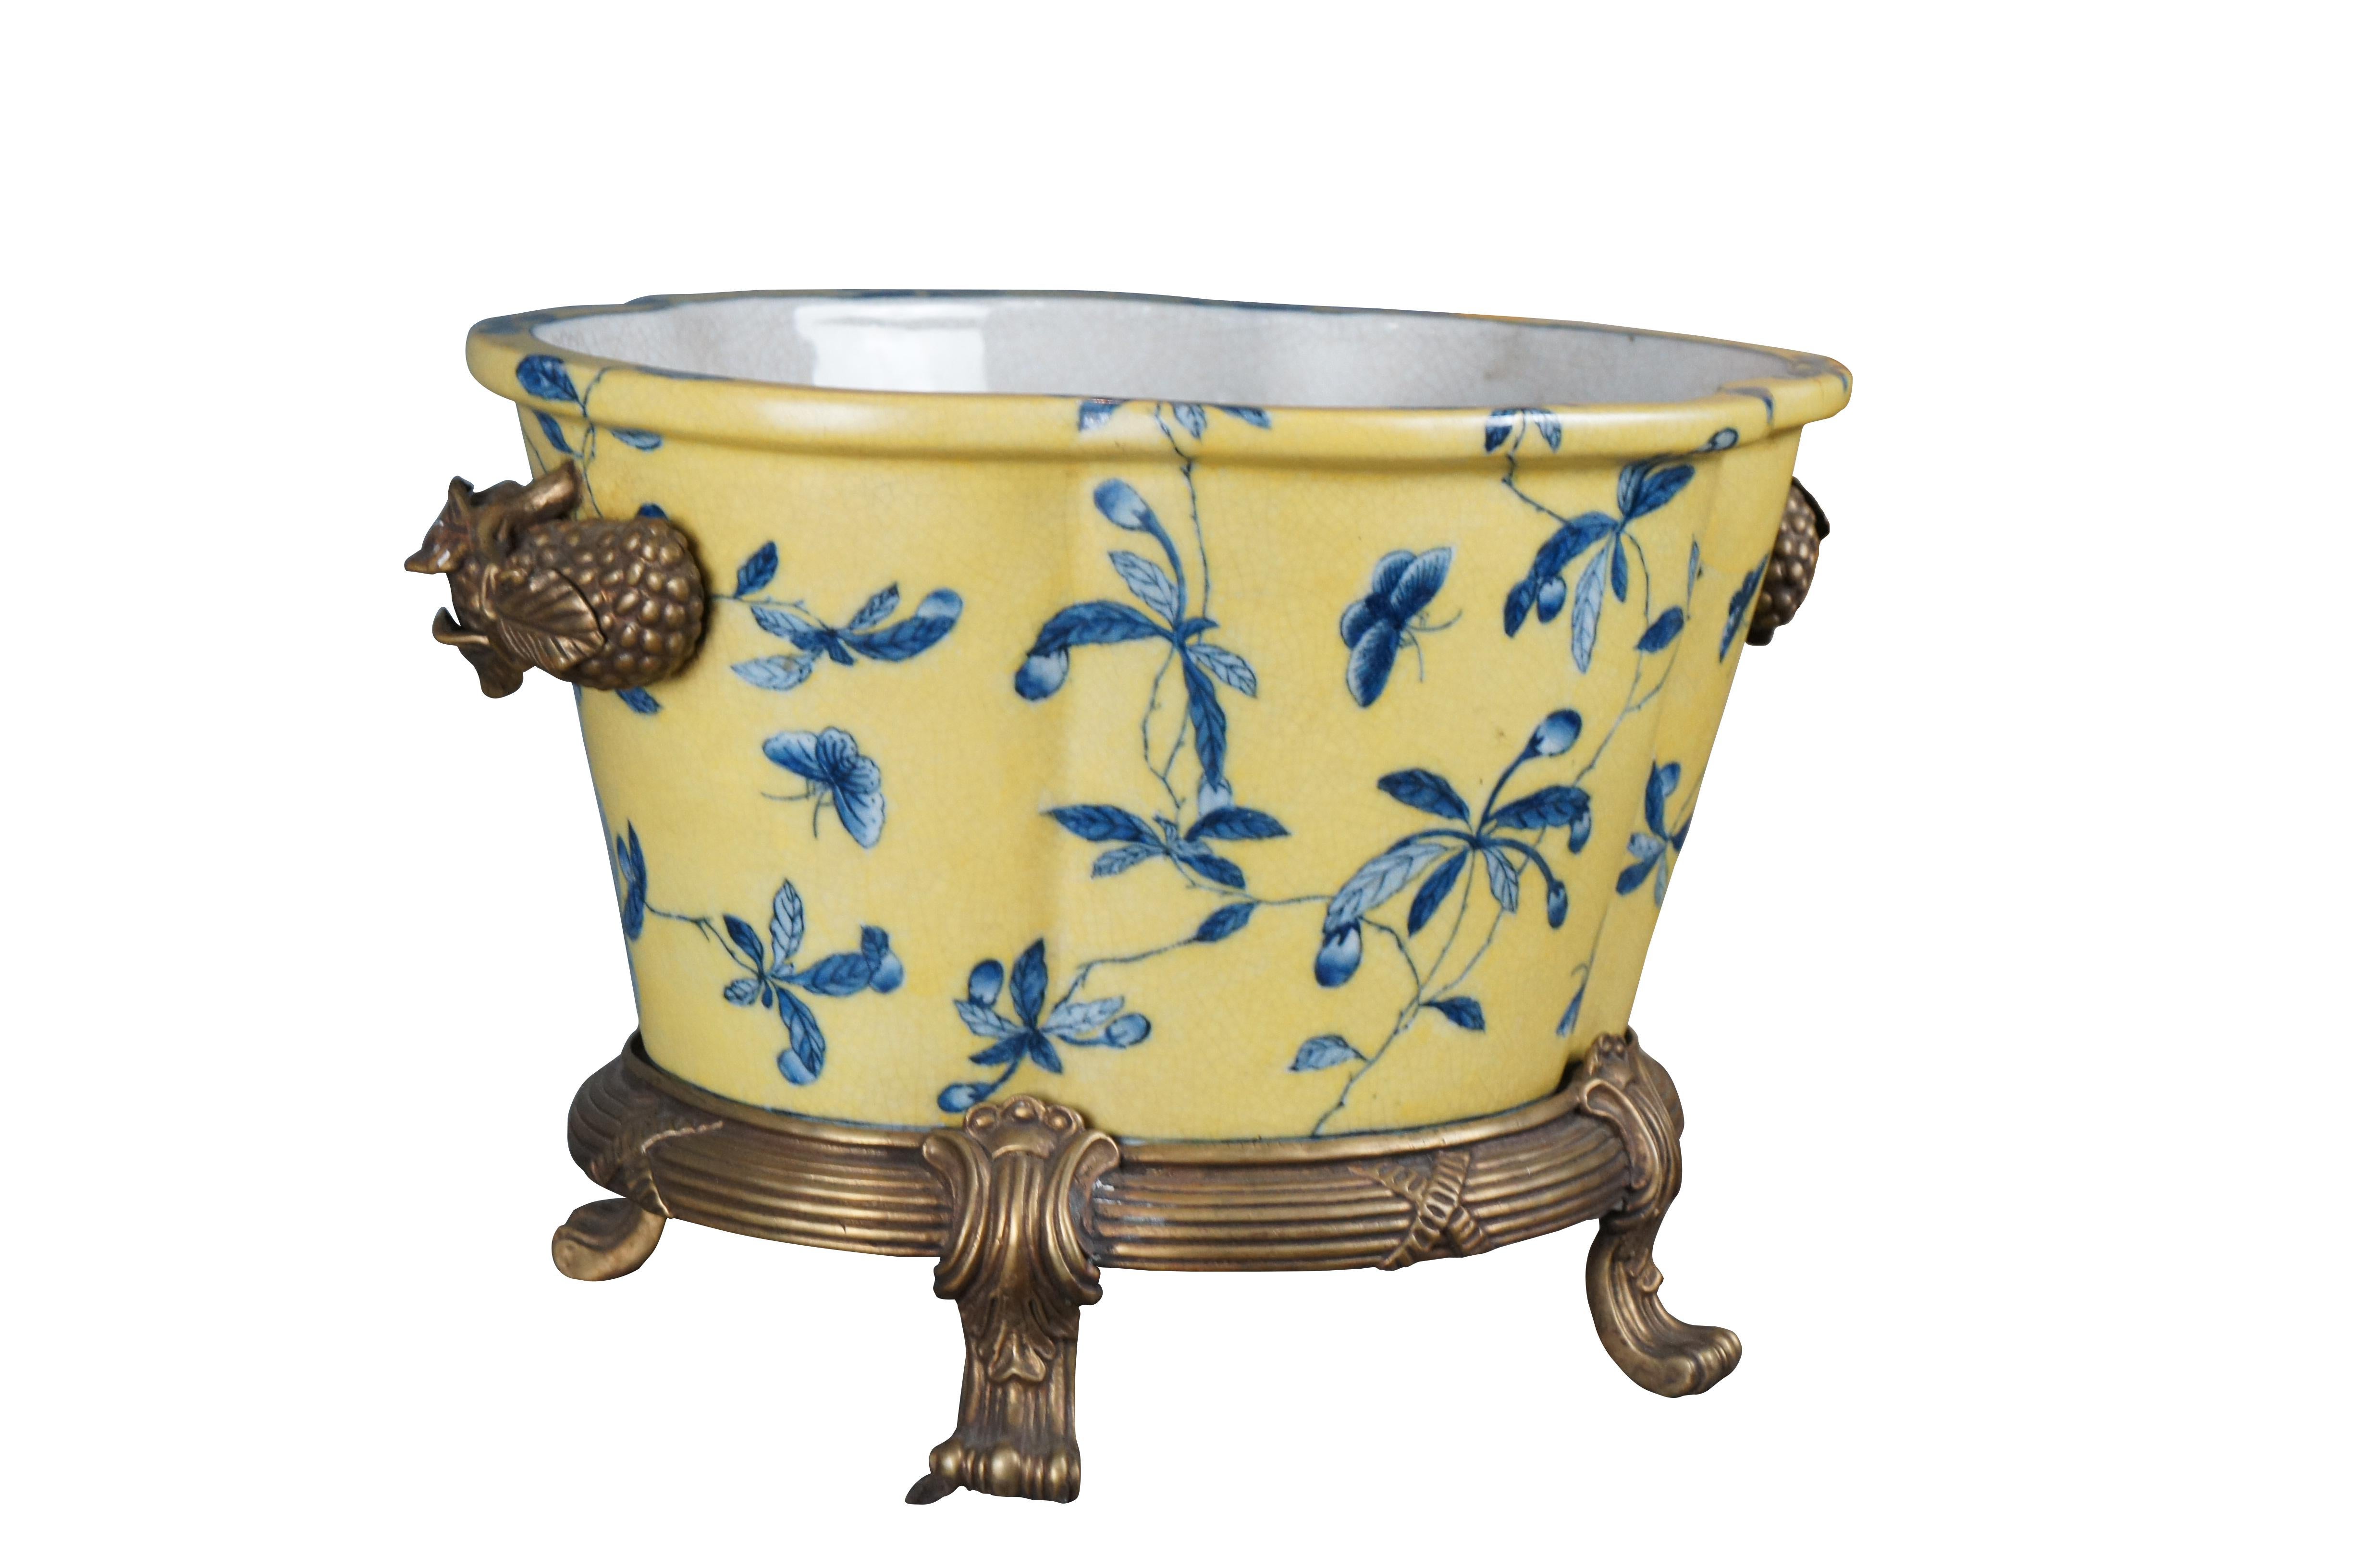 A lovely 20th Century Chinoiserie cachepot by United Wilson (JUWC). Features a lobed porcelain body in yellow with blueberry shrub and butterfly motif. The planter rests on a French inspired bronze base with contoured feet. Handles are high relief